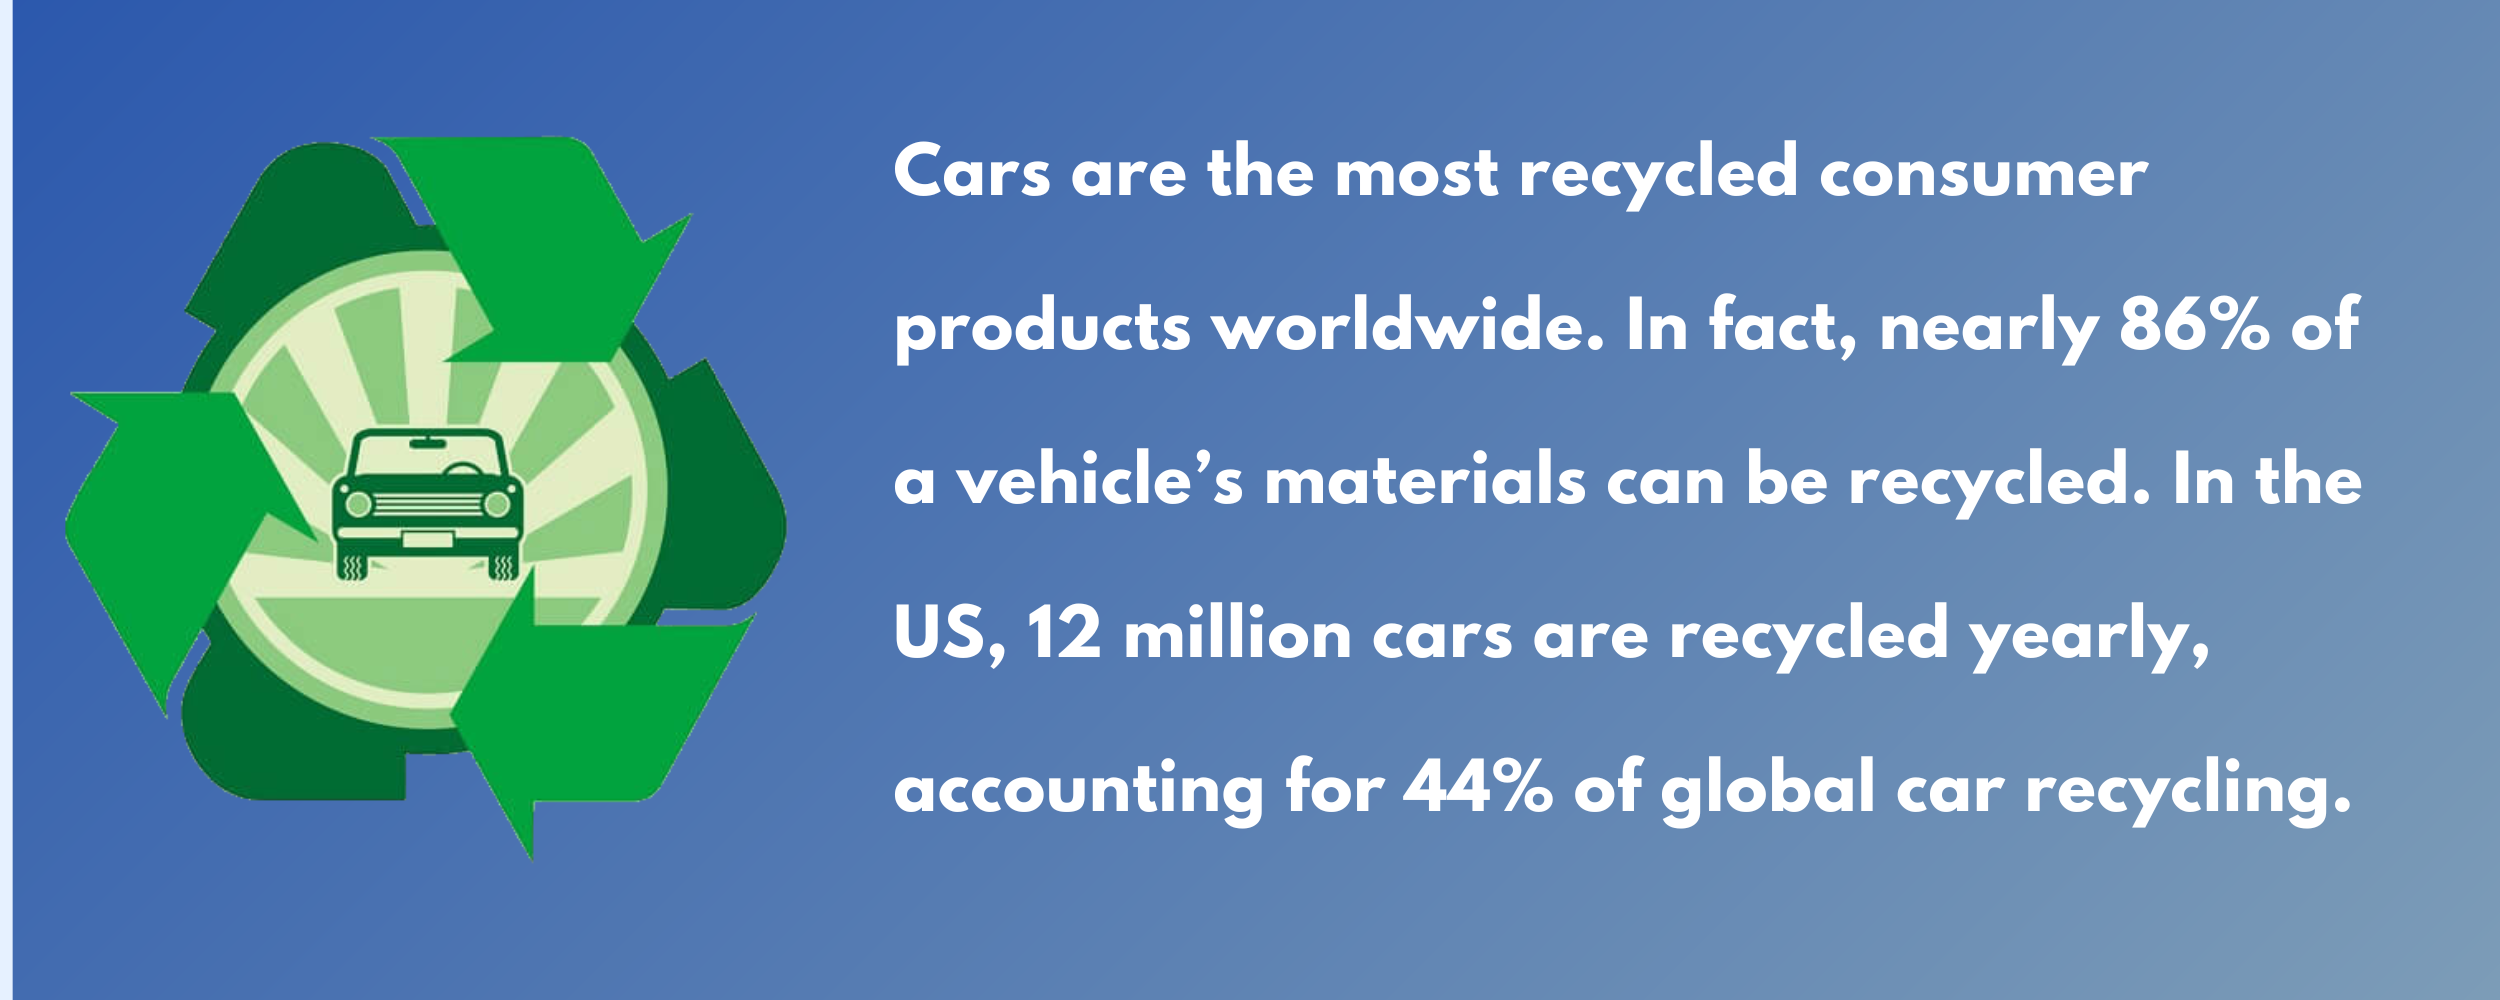 cars are most recycled consumer products and highly recyclable